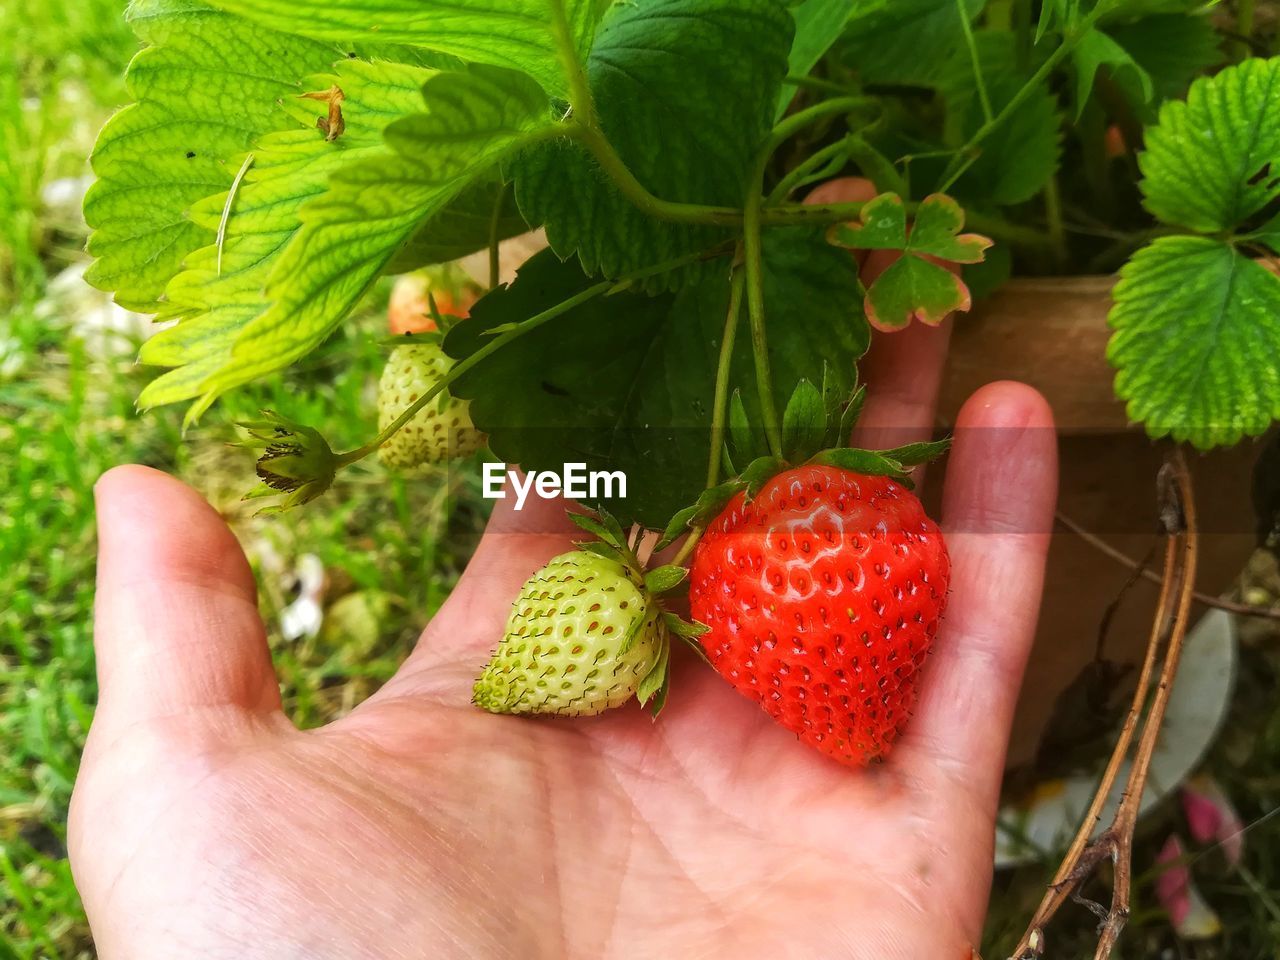 CROPPED IMAGE OF HAND HOLDING STRAWBERRY